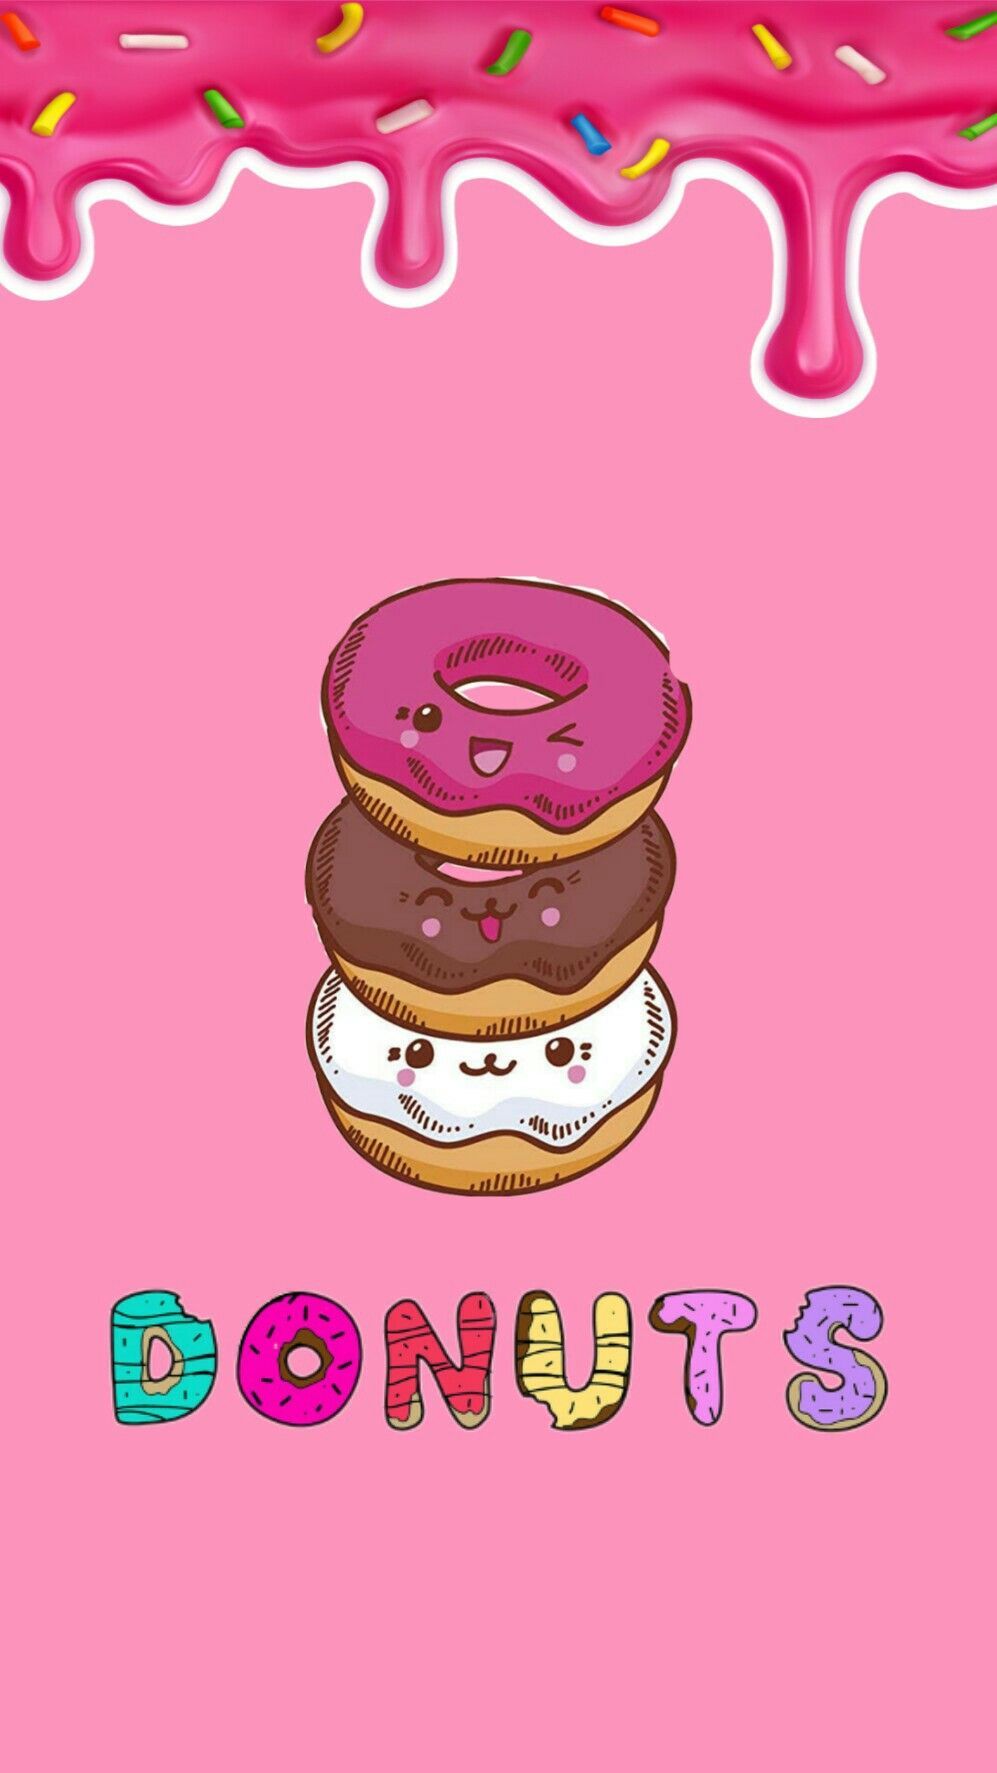 Donuts for you. Donut background, Donuts, Cute donuts